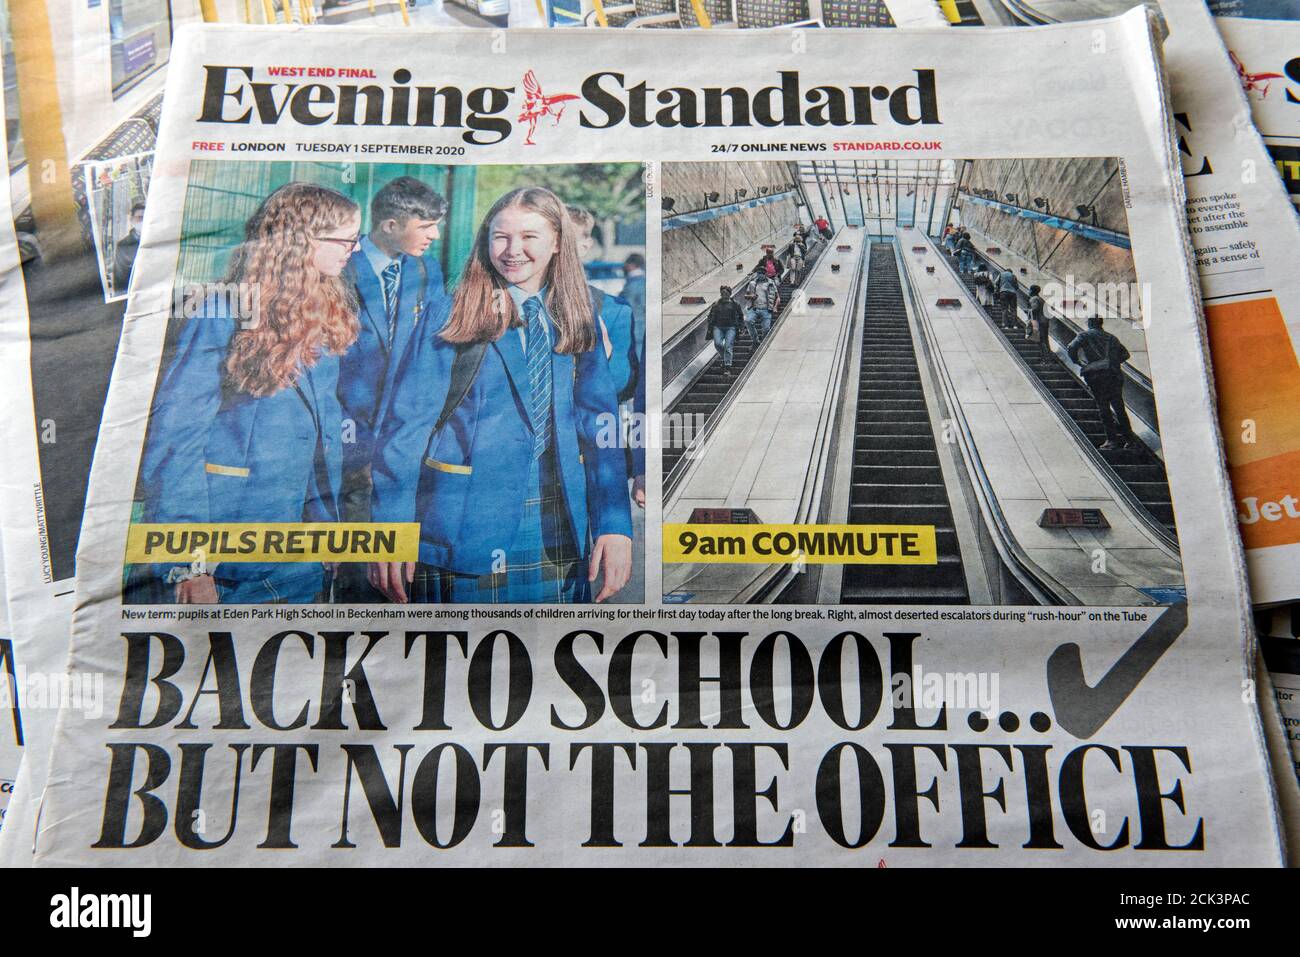 Evening Standard Newspaper headline - Back to School but not the Office - Tuesday 1st September 2020 Editorial use only Stock Photo